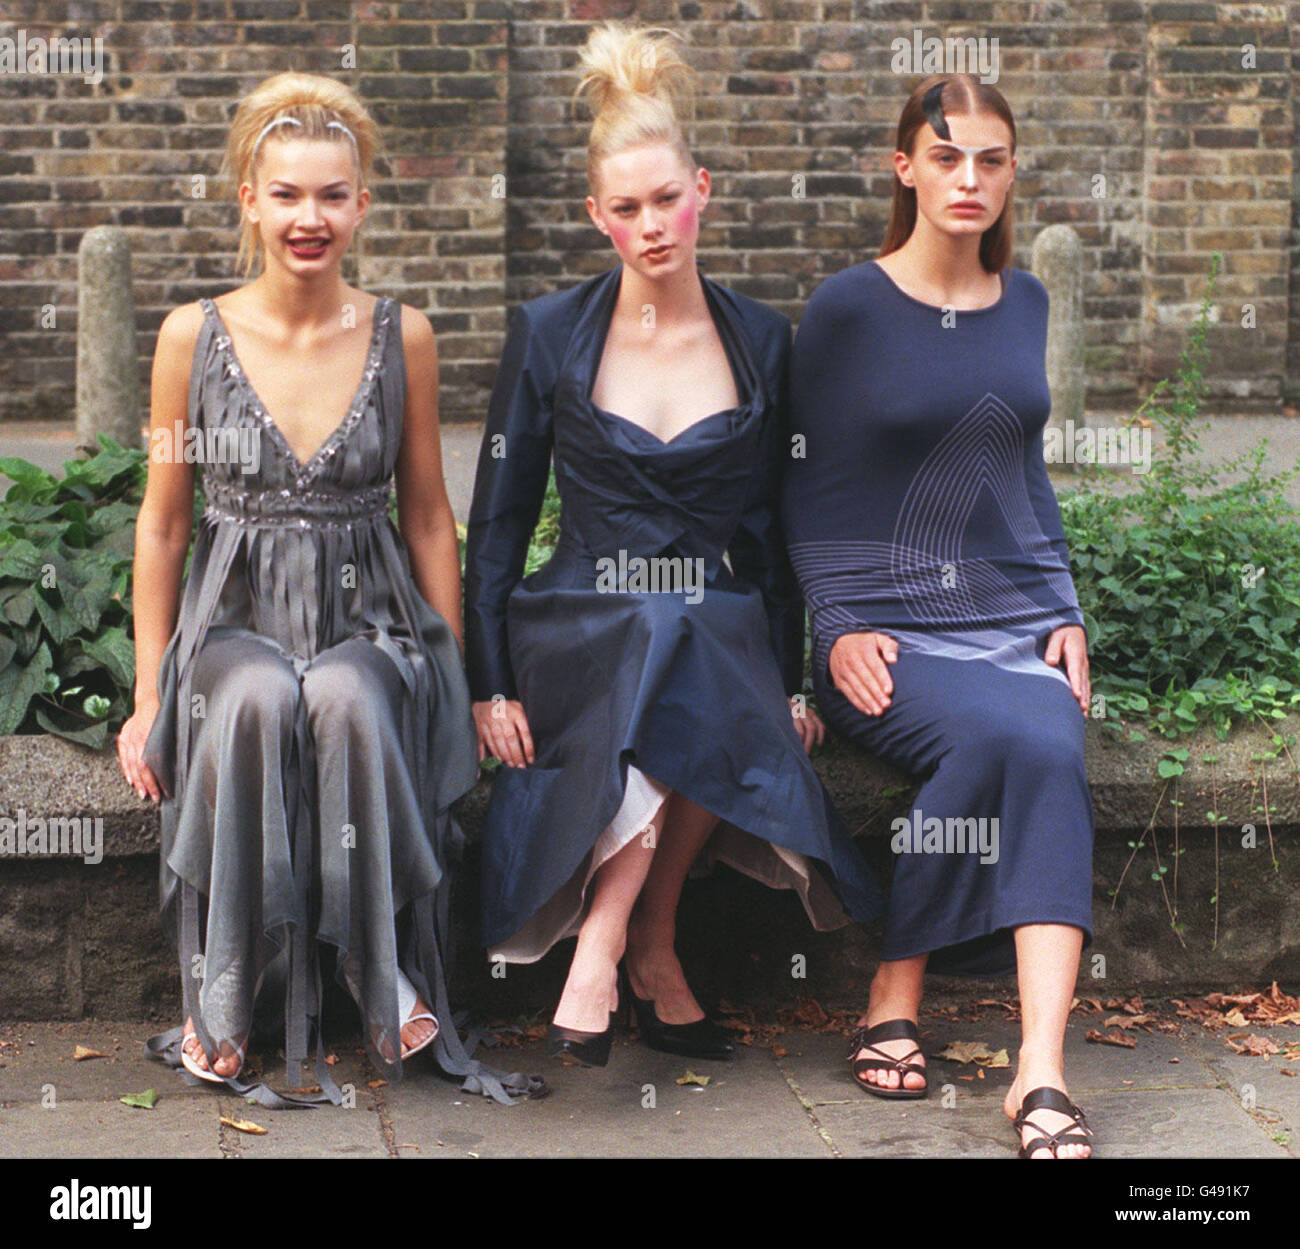 Three models wear designs by three of the six nominees for 'British Designer of the Year 1997', who were announced at a news conference in London today. The winner, voted for by key press and buyers from the fashion industry, will be announced at the Lloyds Bank British Fashion Awards on October 22 at the Royal Albert Hall. (L-R) Lana models a dress by design duo Clements Ribeiro; Kate Lillicrap wears an evening dress by Vivienne Westwood and Amy Weir is dressed in a design by Hussein Chalayan. Stock Photo